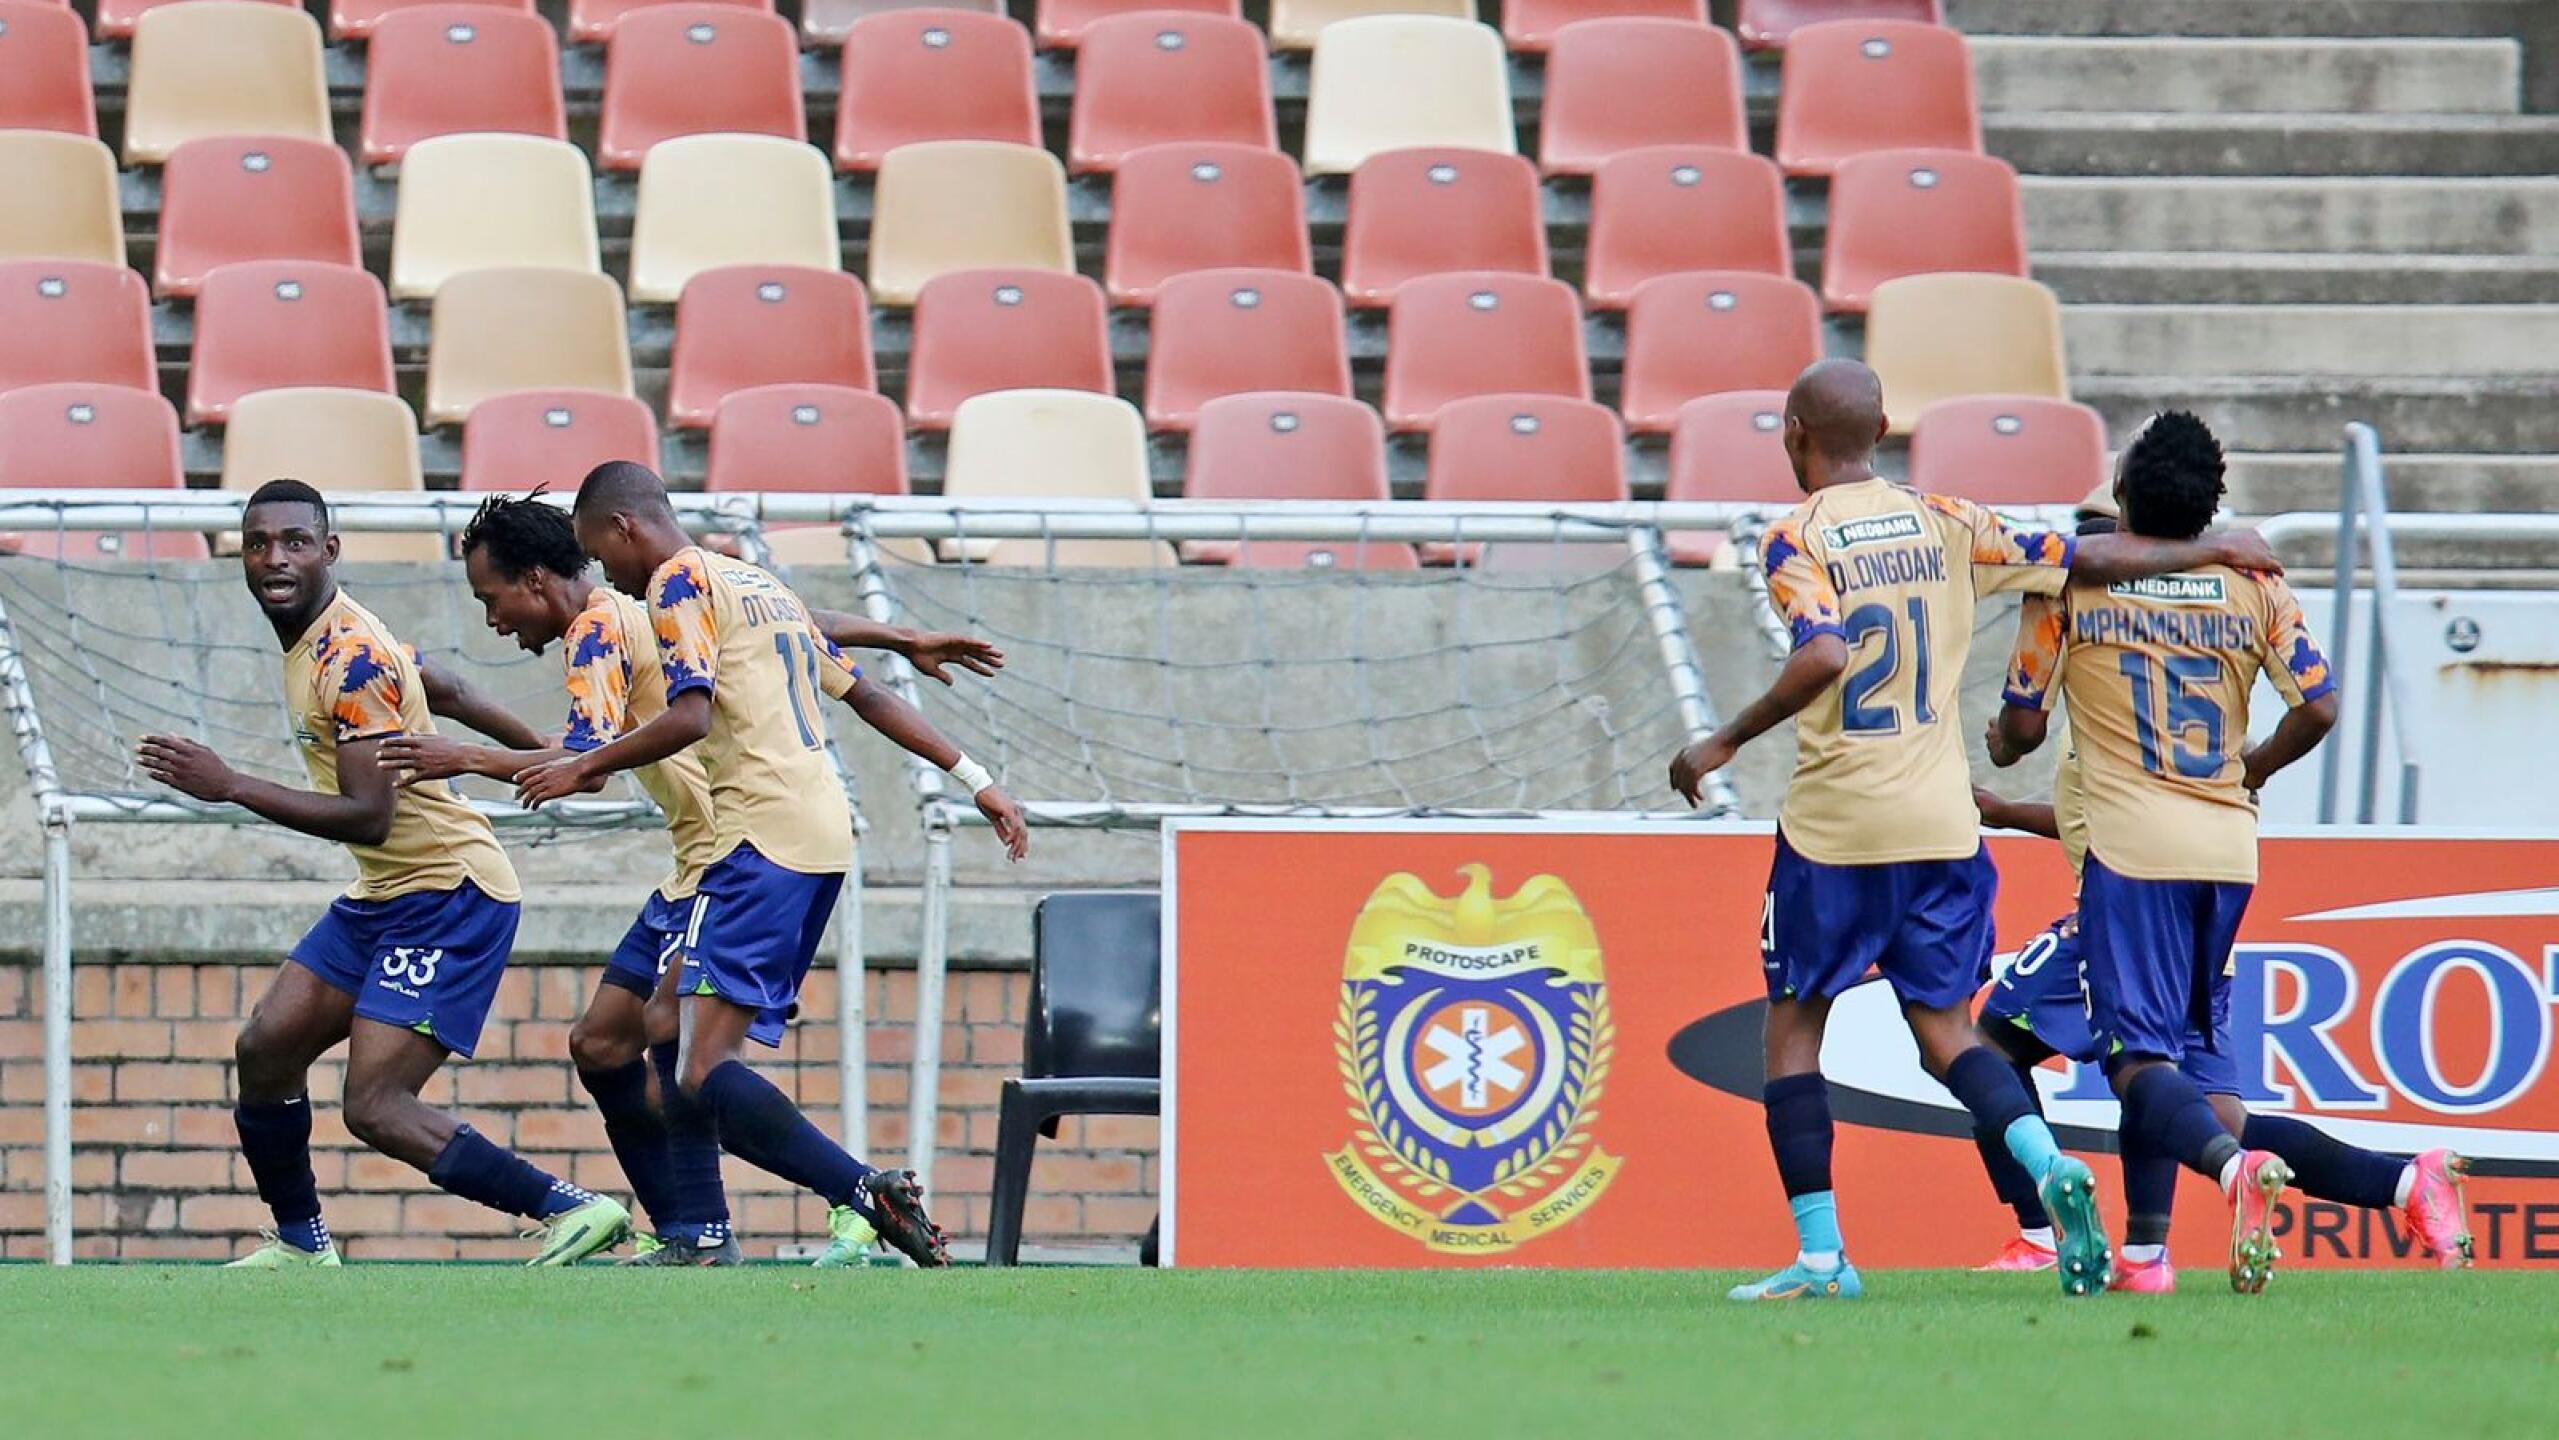 Junior Dion of Marumo Gallants celebrates after scoring the winning goal during their Nedbank Cup quarter-finals match against Baroka FC at the Peter Mokaba Stadium in Polokwane on Saturday